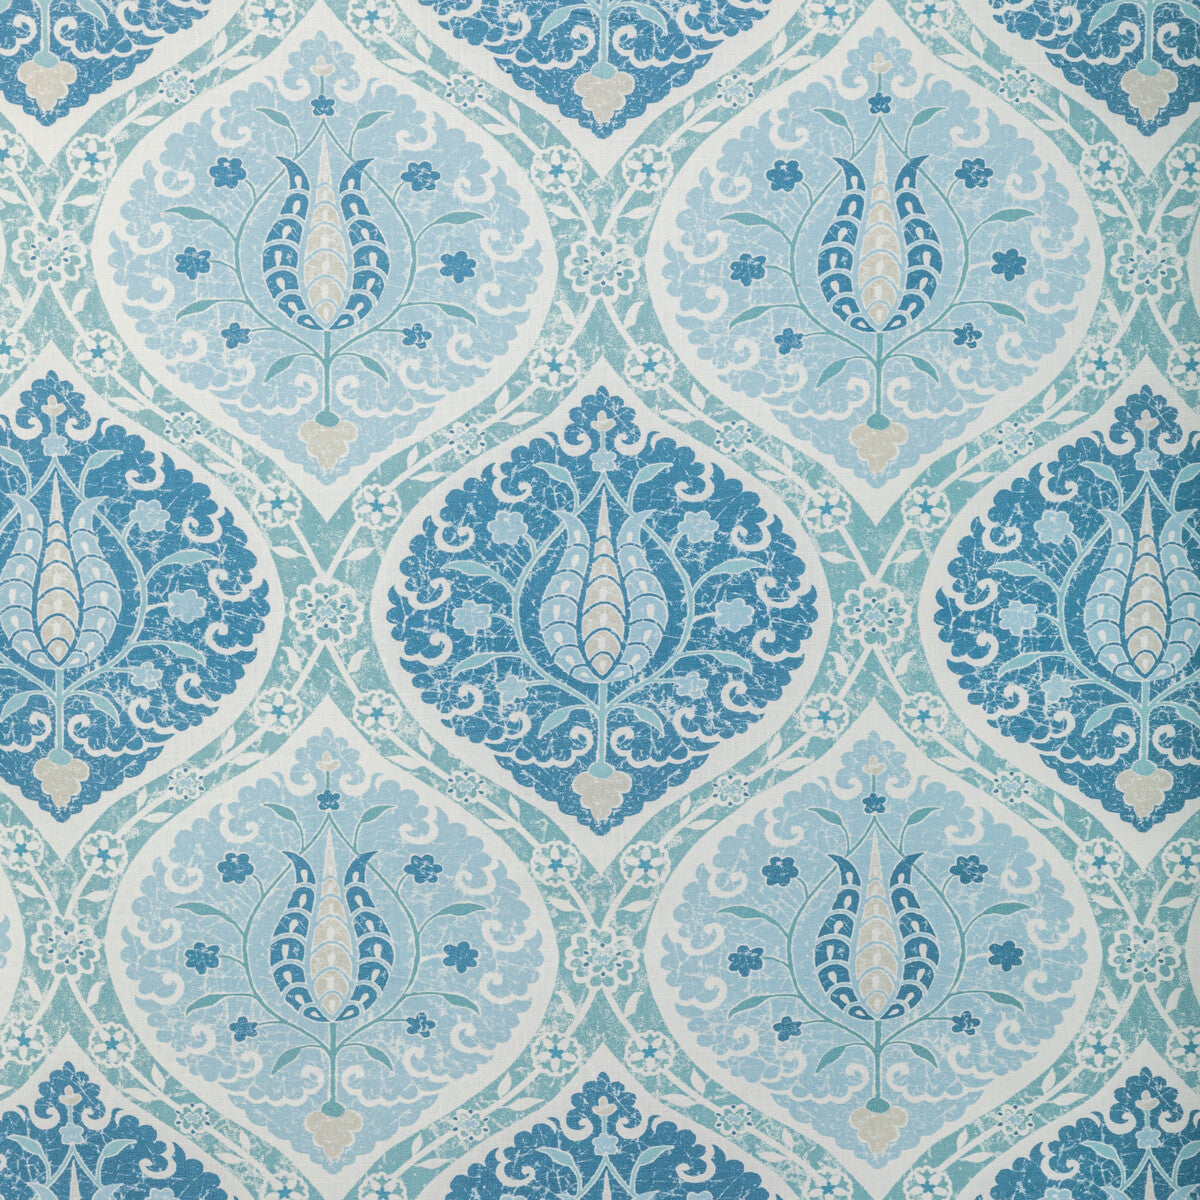 San Polo fabric in adriatic color - pattern SAN POLO.5.0 - by Kravet Basics